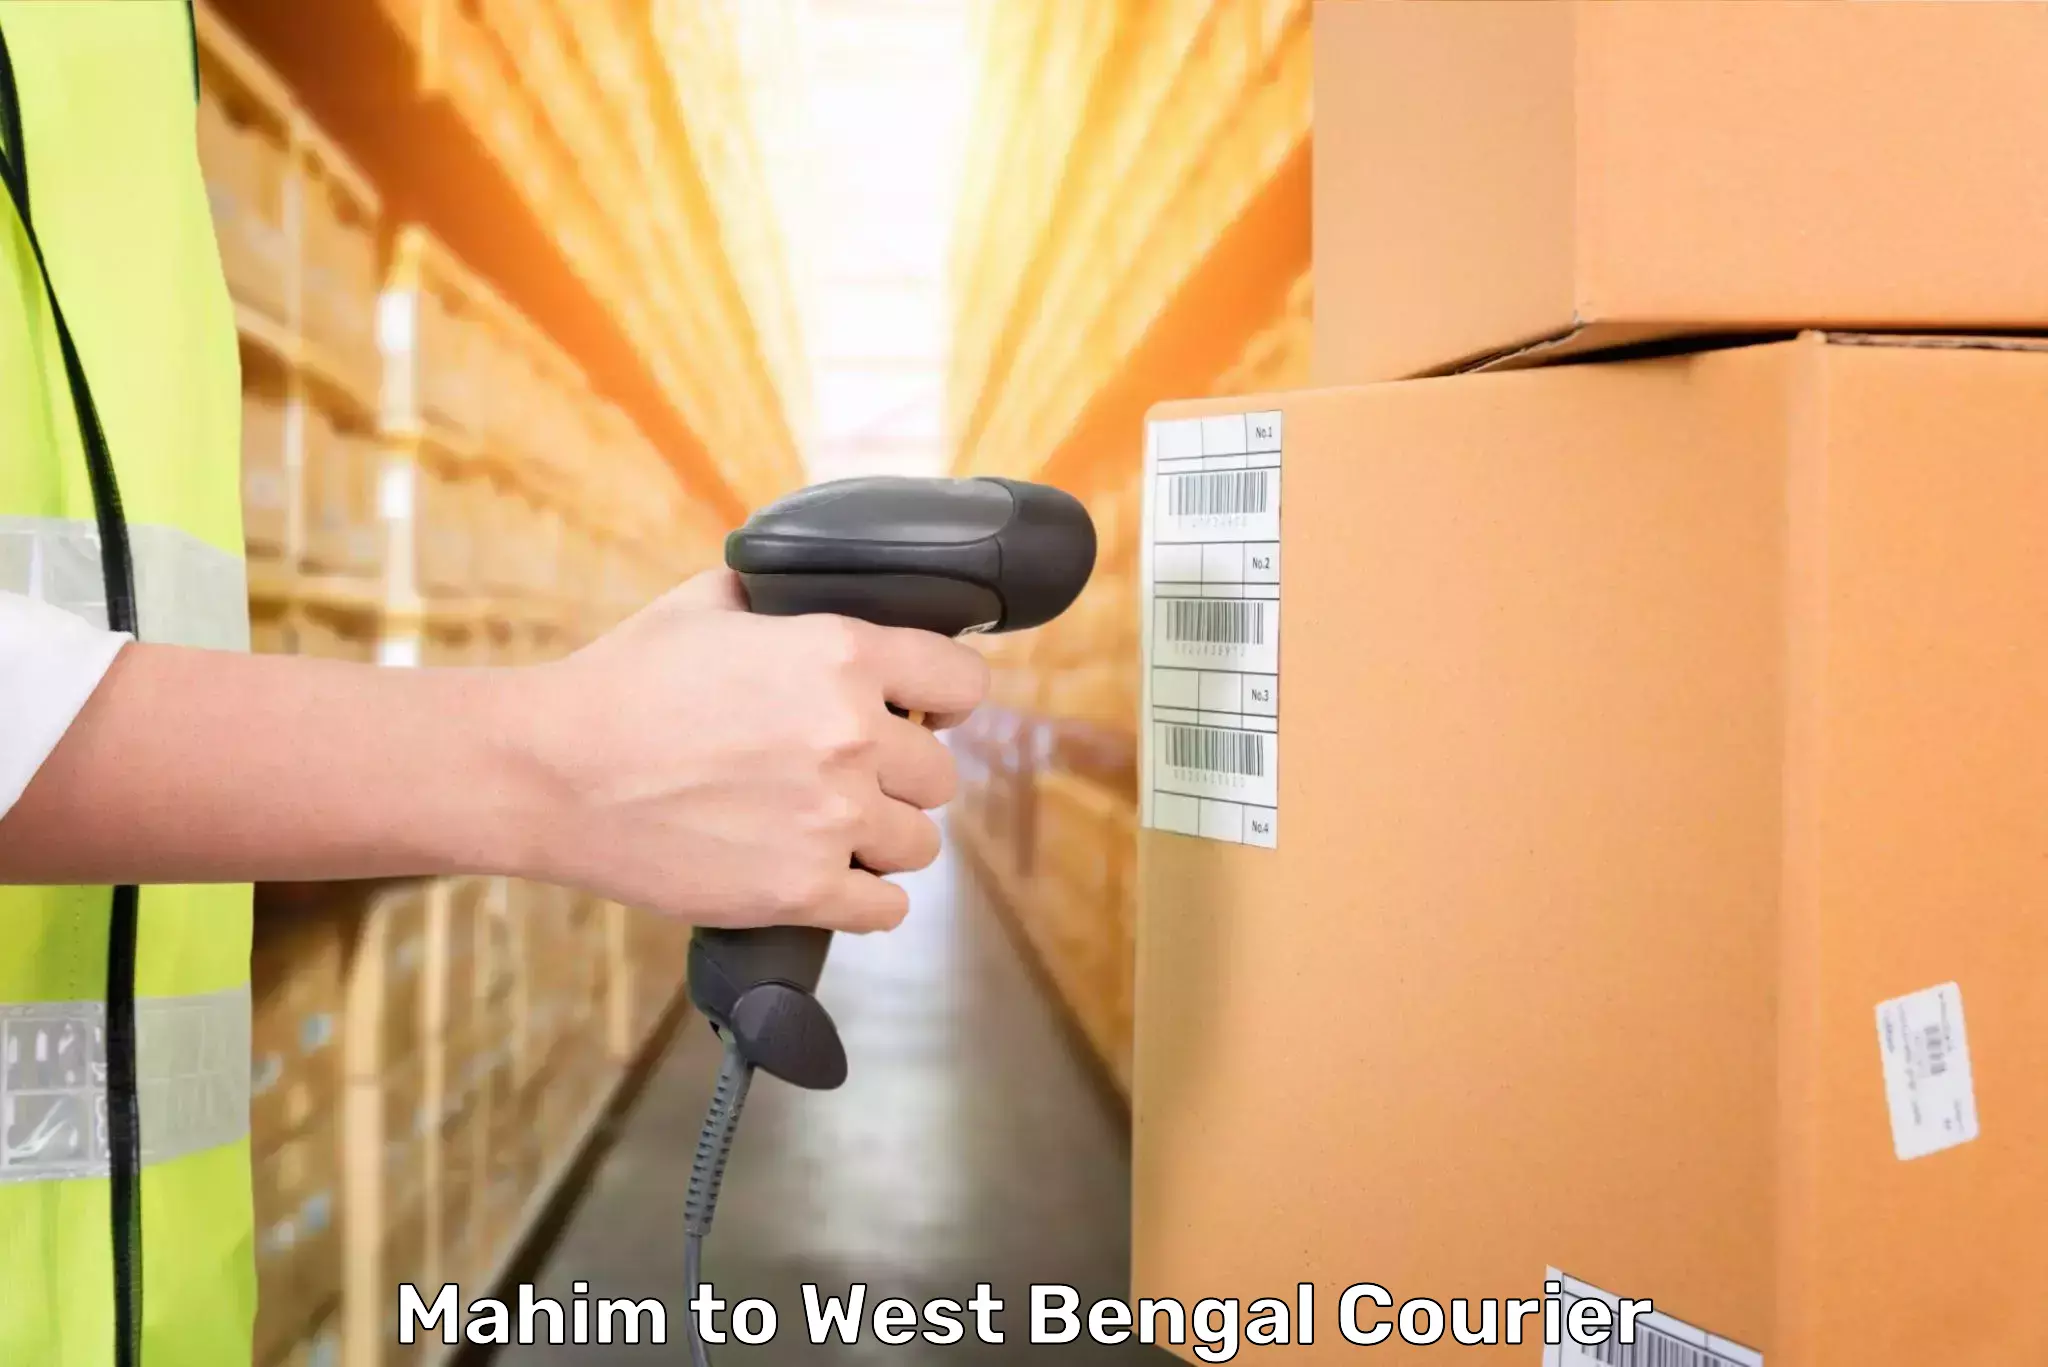 Luggage transport consultancy Mahim to West Bengal